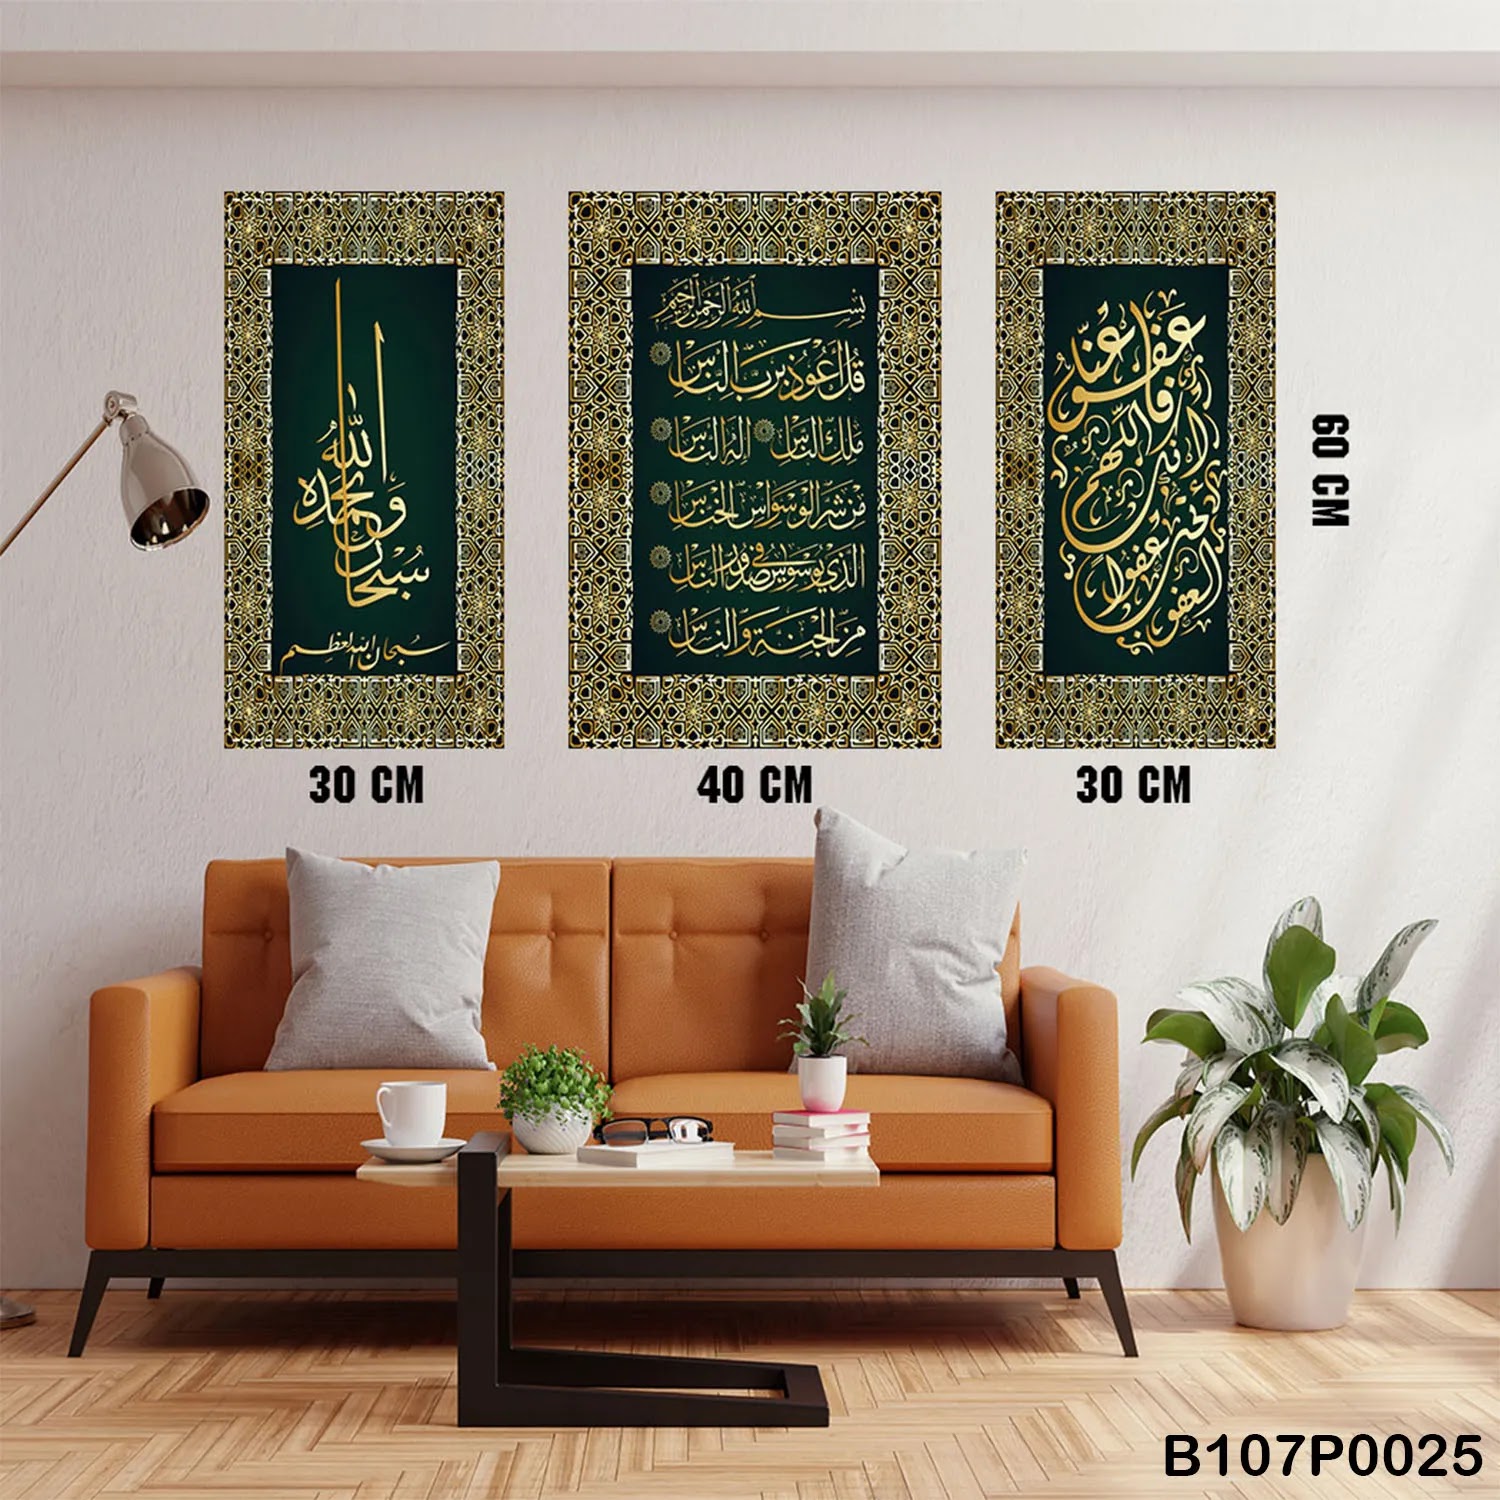 Dark green Triptych panel with Arabic calligraphy for Quran